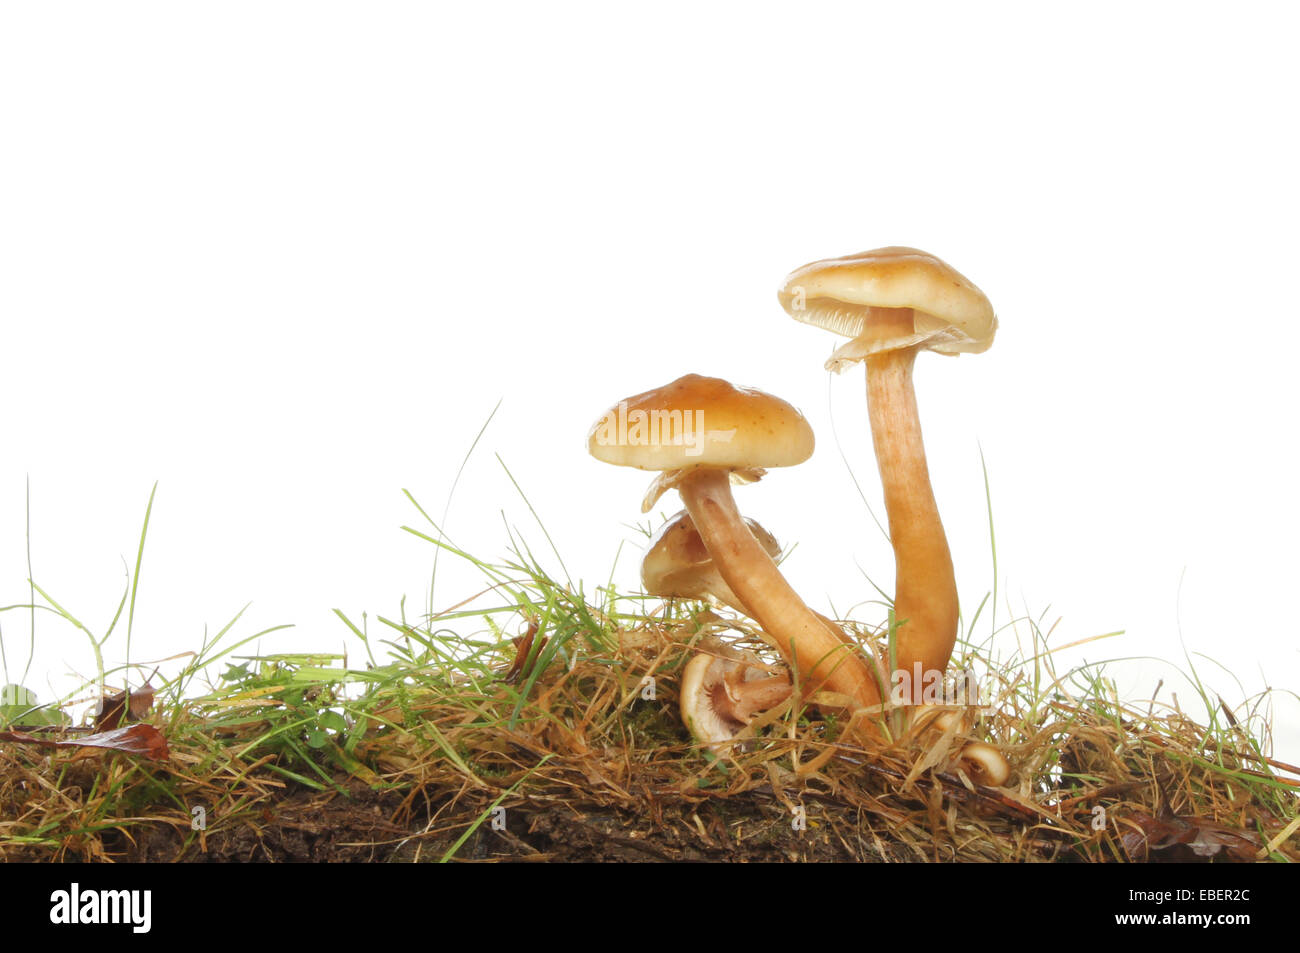 Toadstools growing in grass against a white background Stock Photo